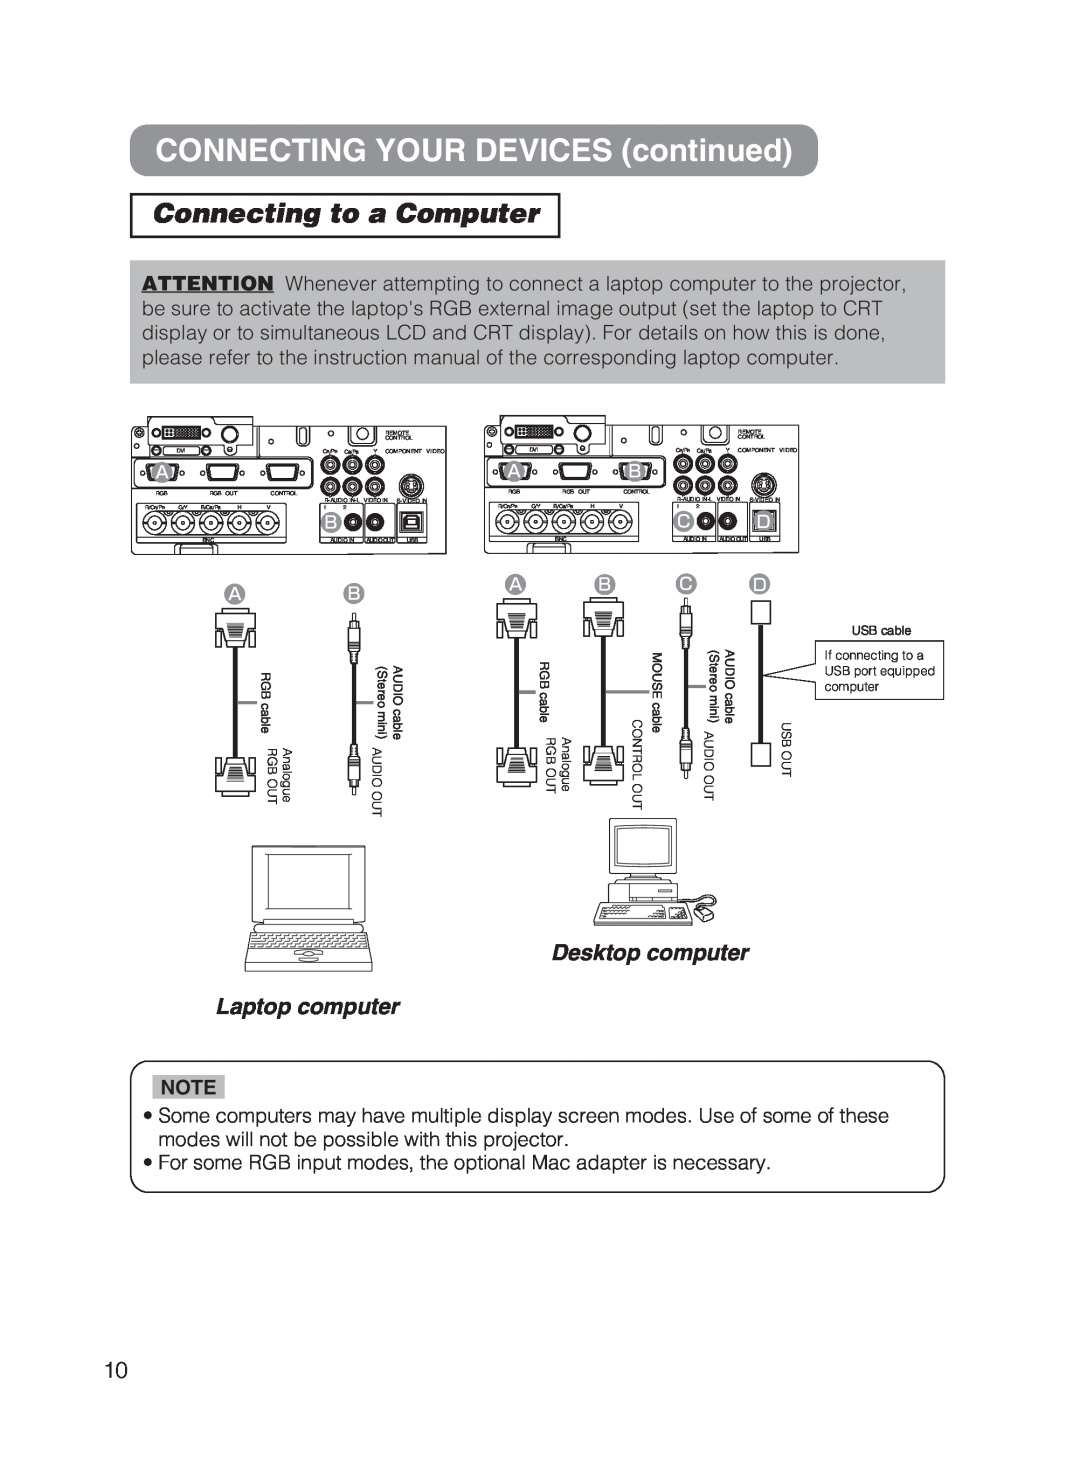 Hitachi CP-X870 user manual CONNECTING YOUR DEVICES continued, Connecting to a Computer, Desktop computer Laptop computer 